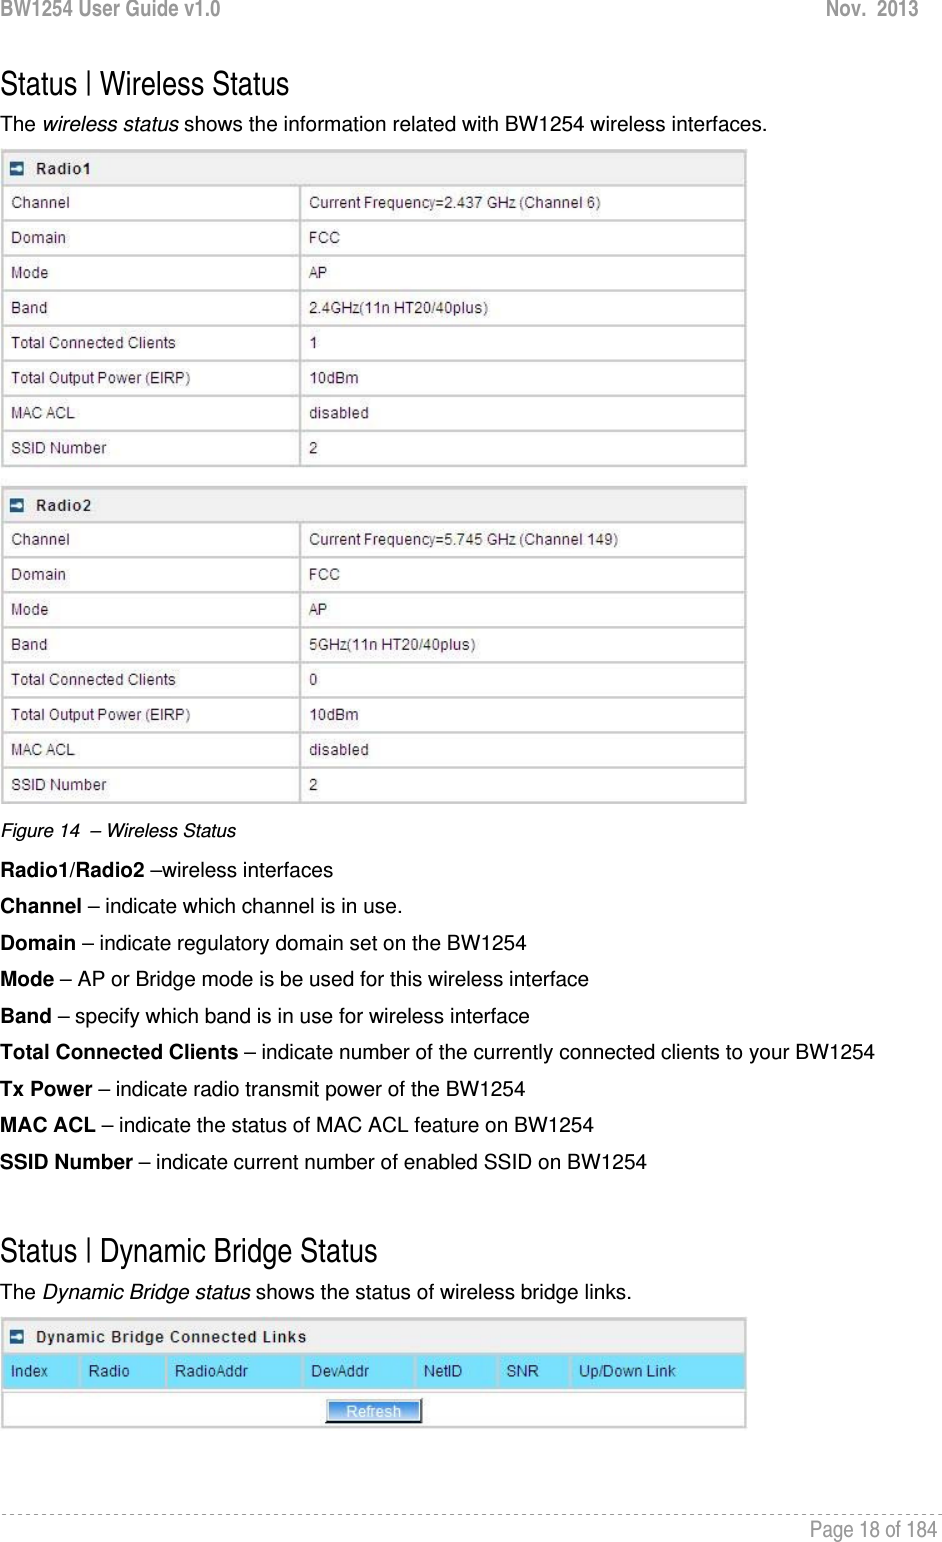 BW1254 User Guide v1.0  Nov.  2013     Page 18 of 184   Status | Wireless Status The wireless status shows the information related with BW1254 wireless interfaces.  Figure 14  – Wireless Status Radio1/Radio2 –wireless interfaces Channel – indicate which channel is in use. Domain – indicate regulatory domain set on the BW1254 Mode – AP or Bridge mode is be used for this wireless interface Band – specify which band is in use for wireless interface Total Connected Clients – indicate number of the currently connected clients to your BW1254 Tx Power – indicate radio transmit power of the BW1254 MAC ACL – indicate the status of MAC ACL feature on BW1254 SSID Number – indicate current number of enabled SSID on BW1254  Status | Dynamic Bridge Status The Dynamic Bridge status shows the status of wireless bridge links.  